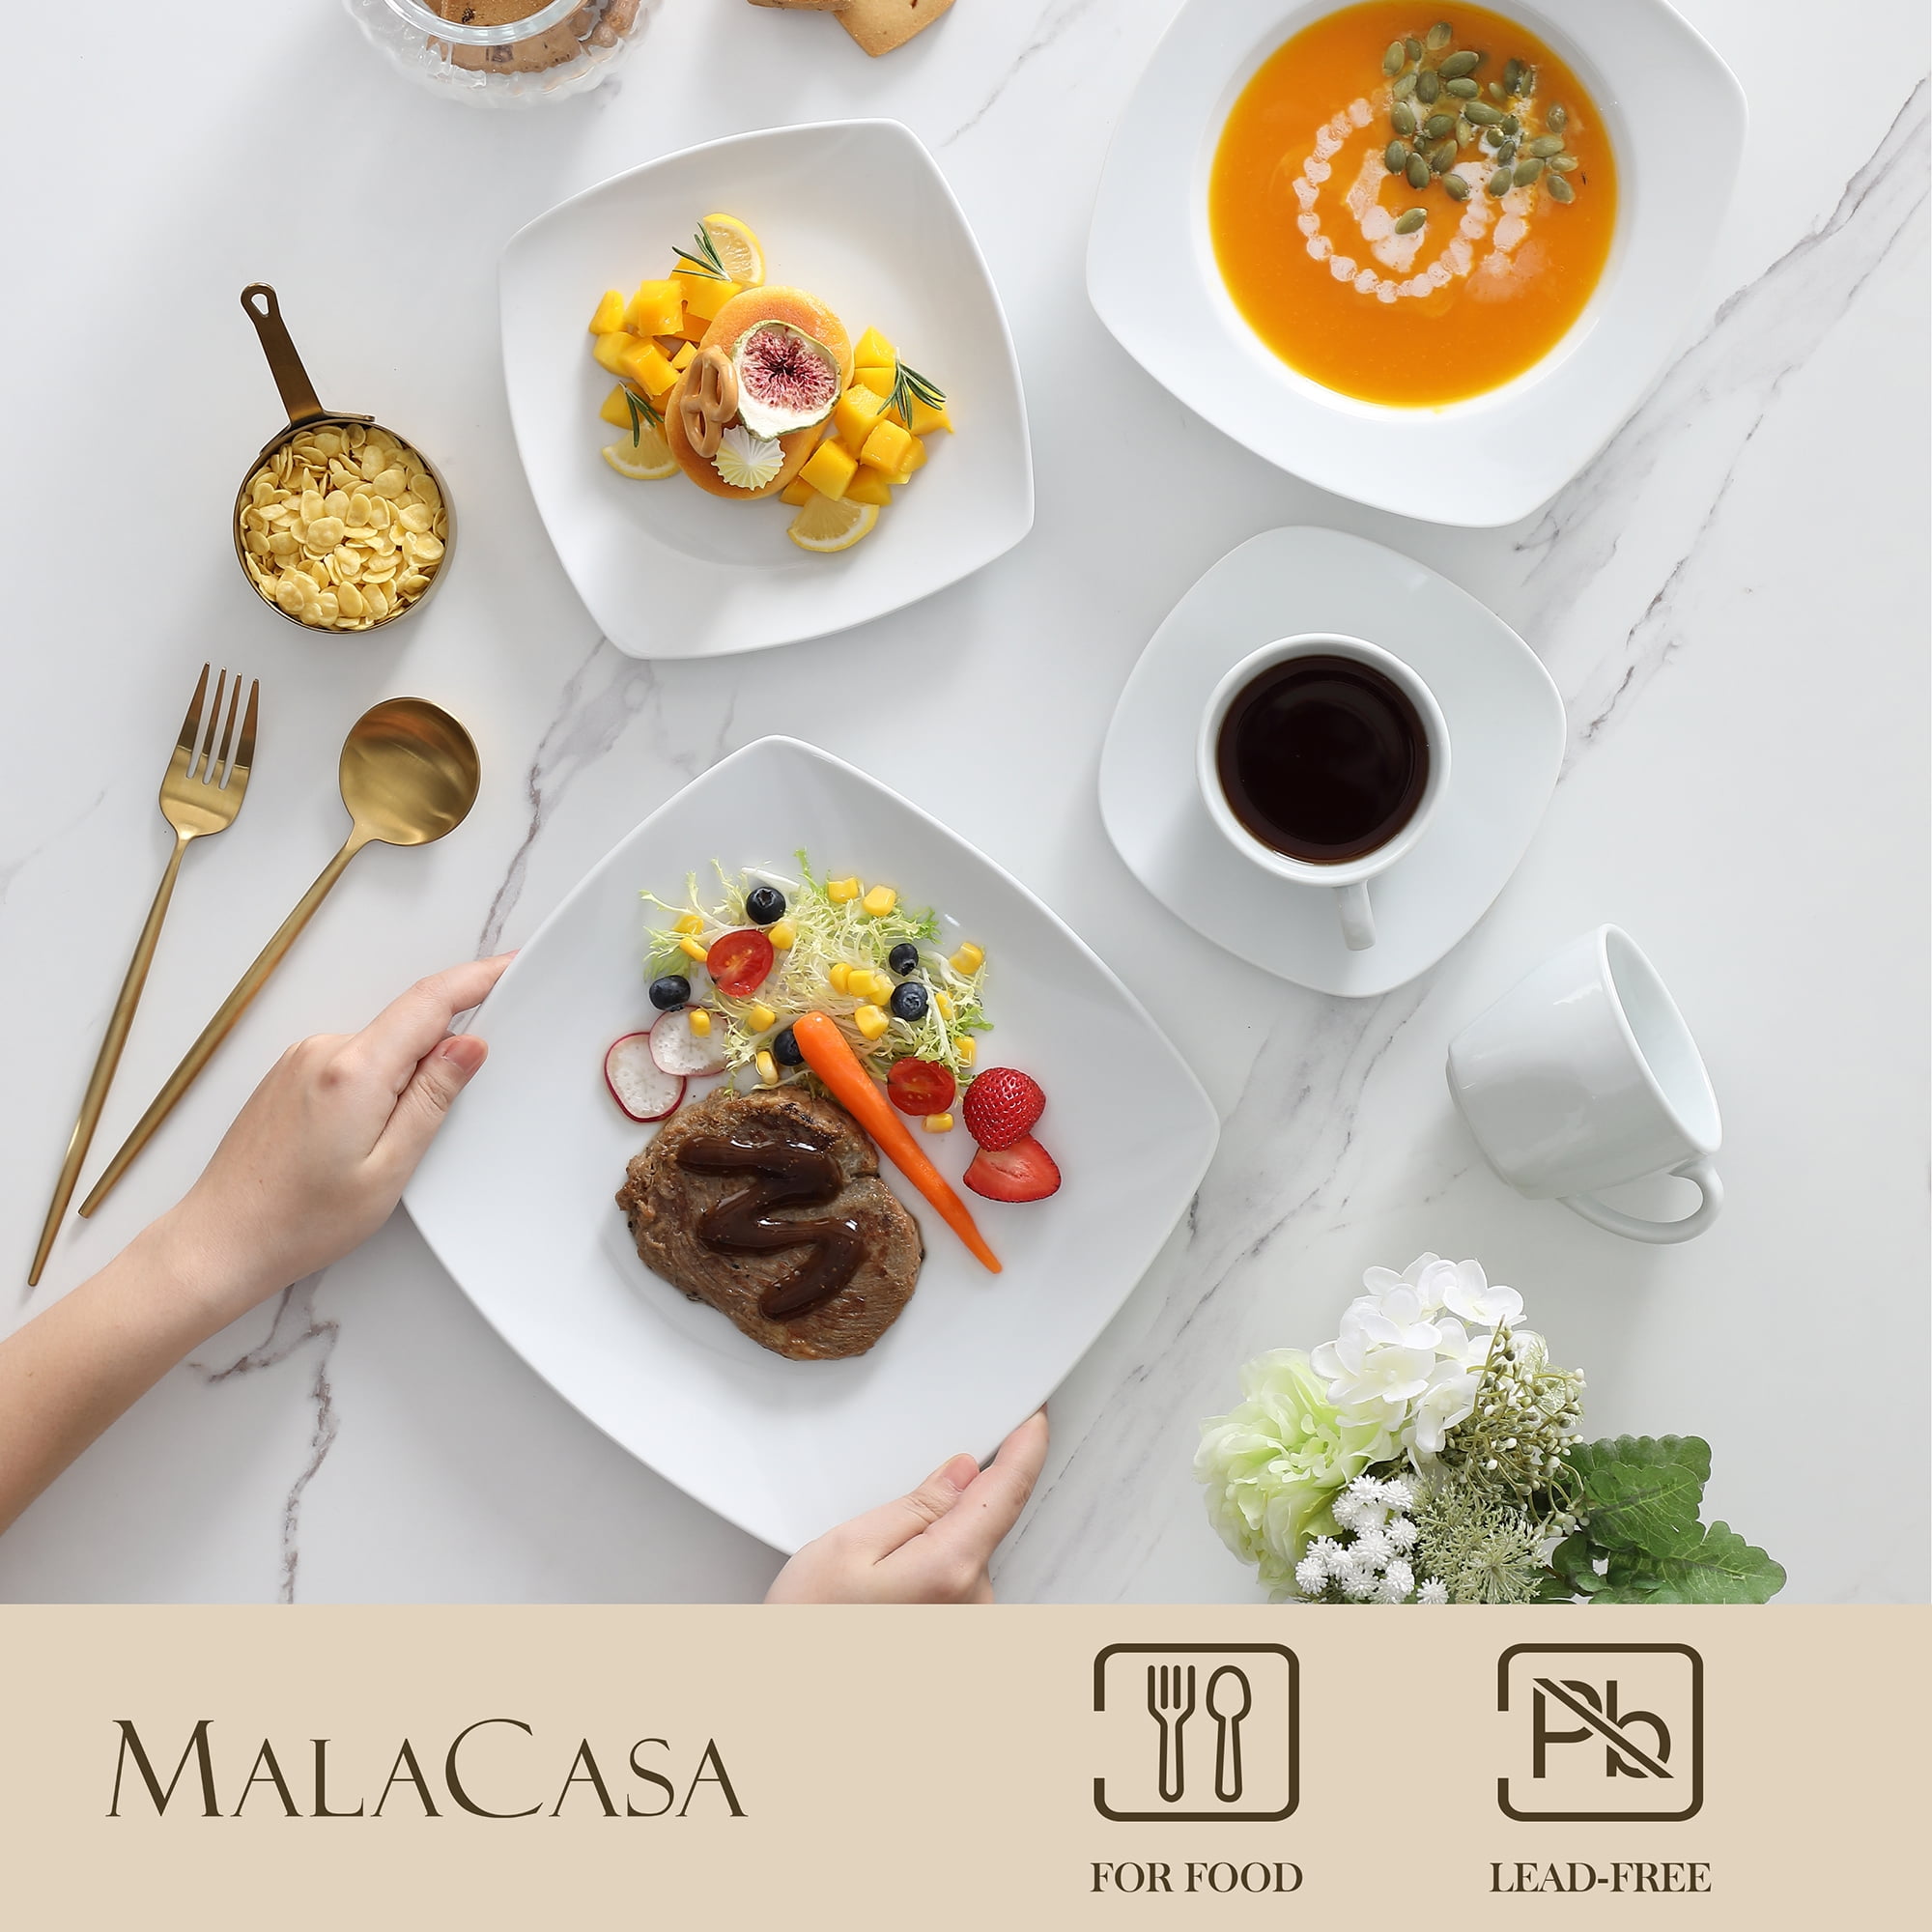 A distinguished Malacasa Dinnerware With an Unruly Class 😎 Only